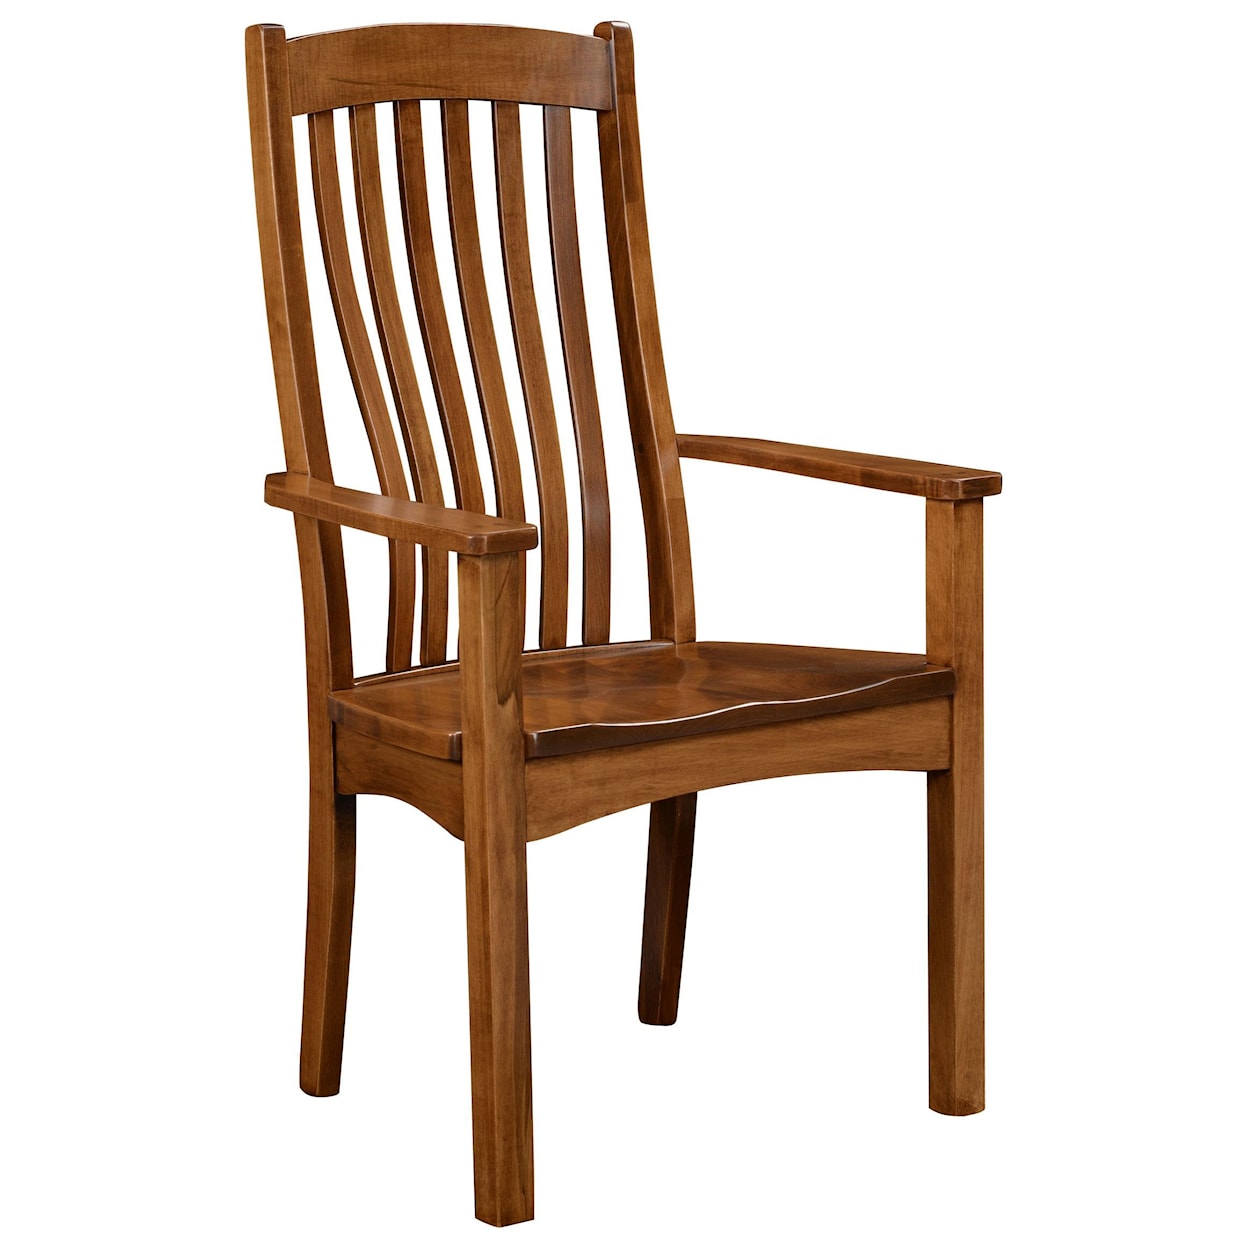 Wengerd Wood Products Liberty Arm Chair